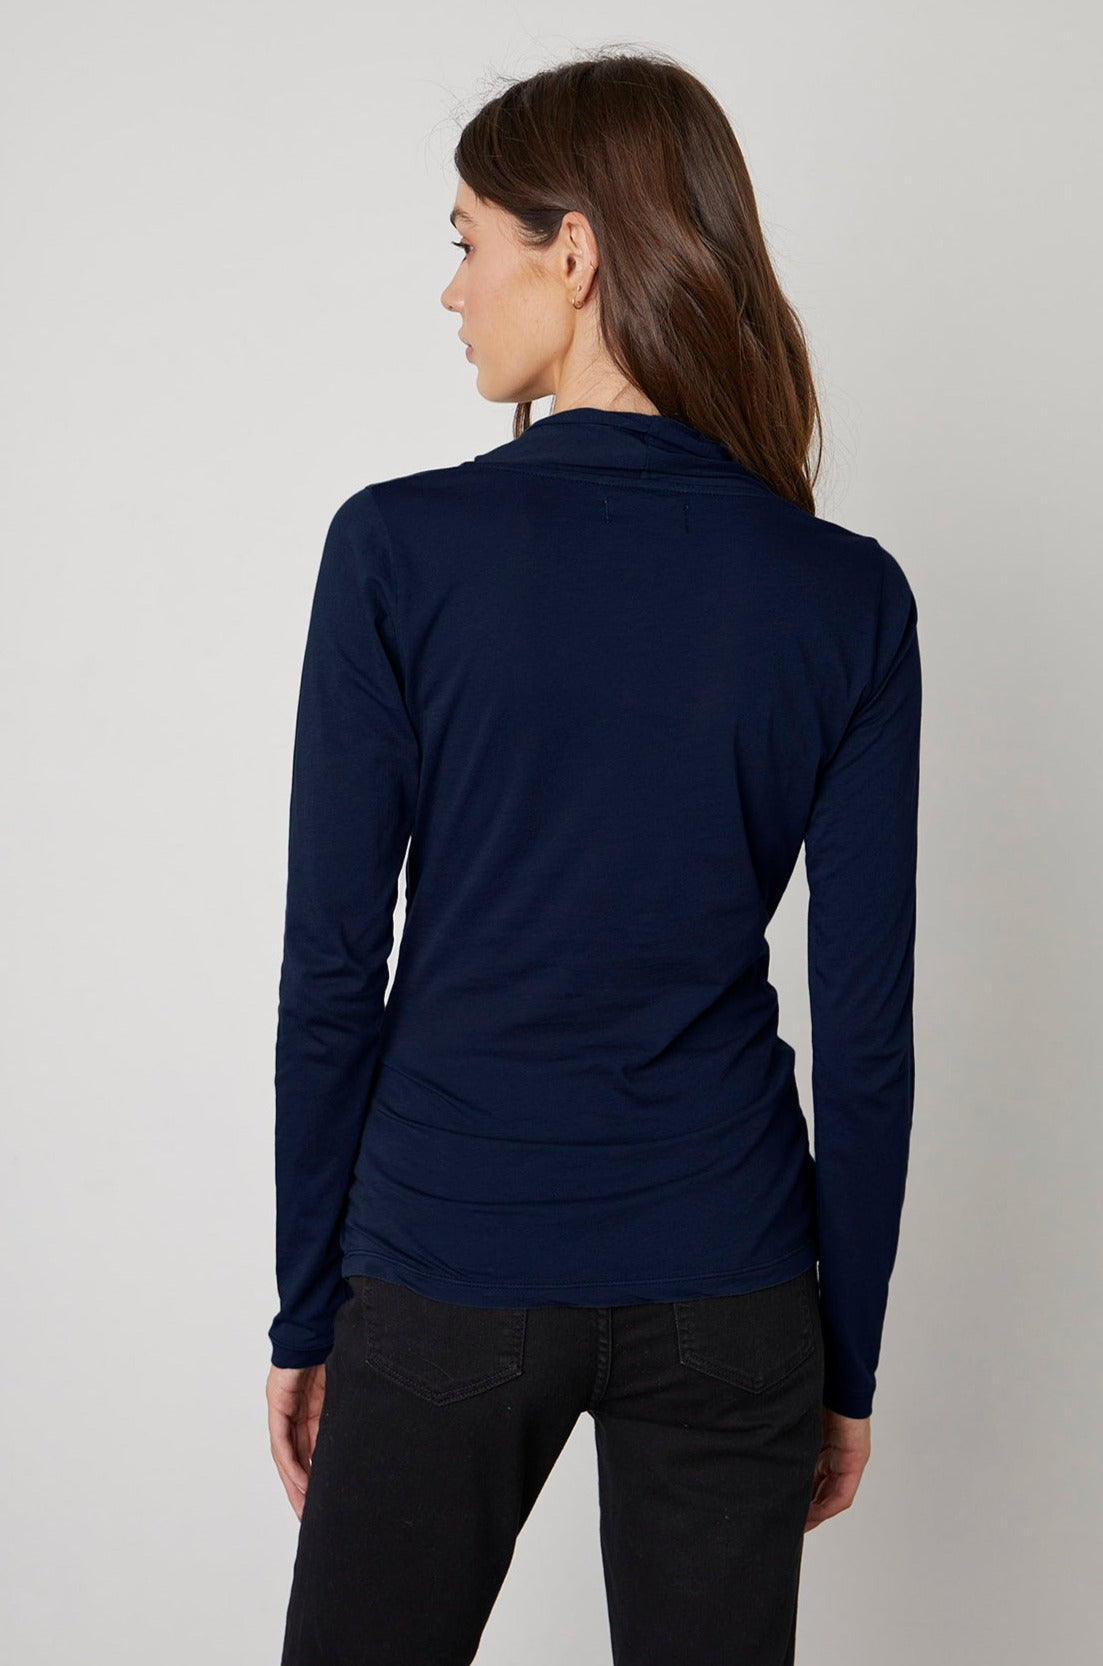 the back view of a woman wearing a Velvet by Graham & Spencer MERI WRAP FRONT FITTED TOP.-23013992890561